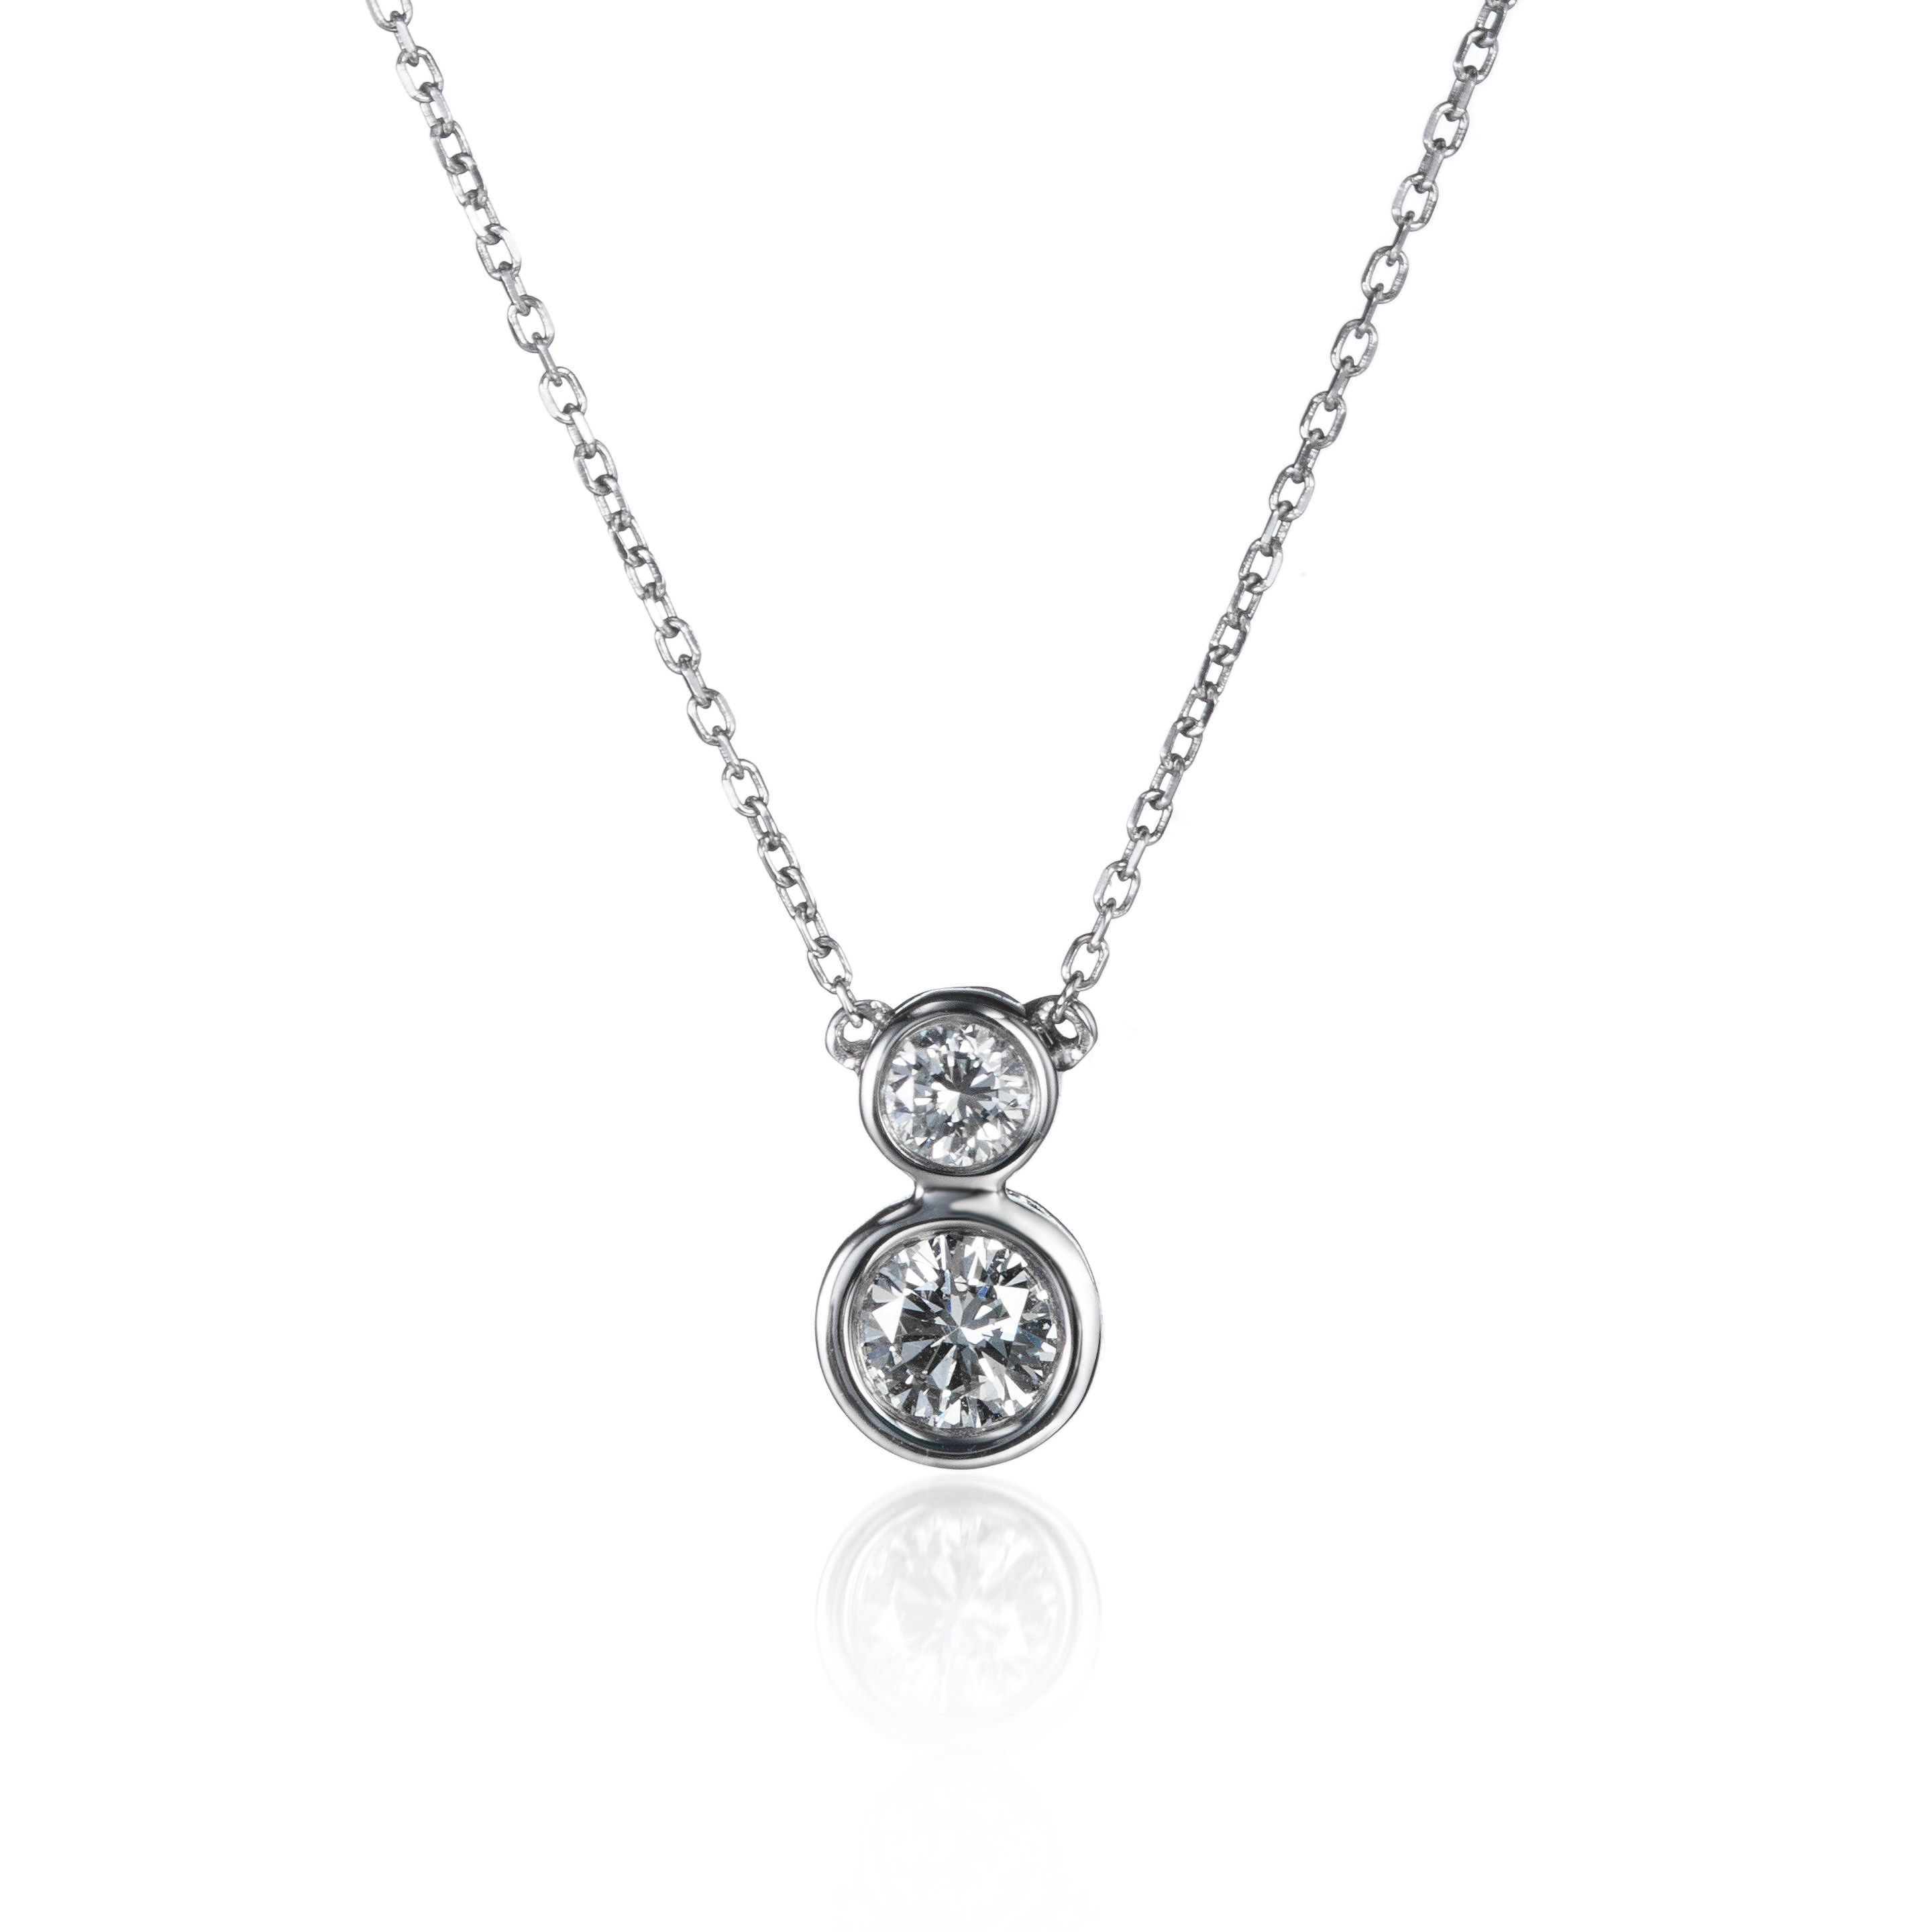 Twogether Diamond Necklace